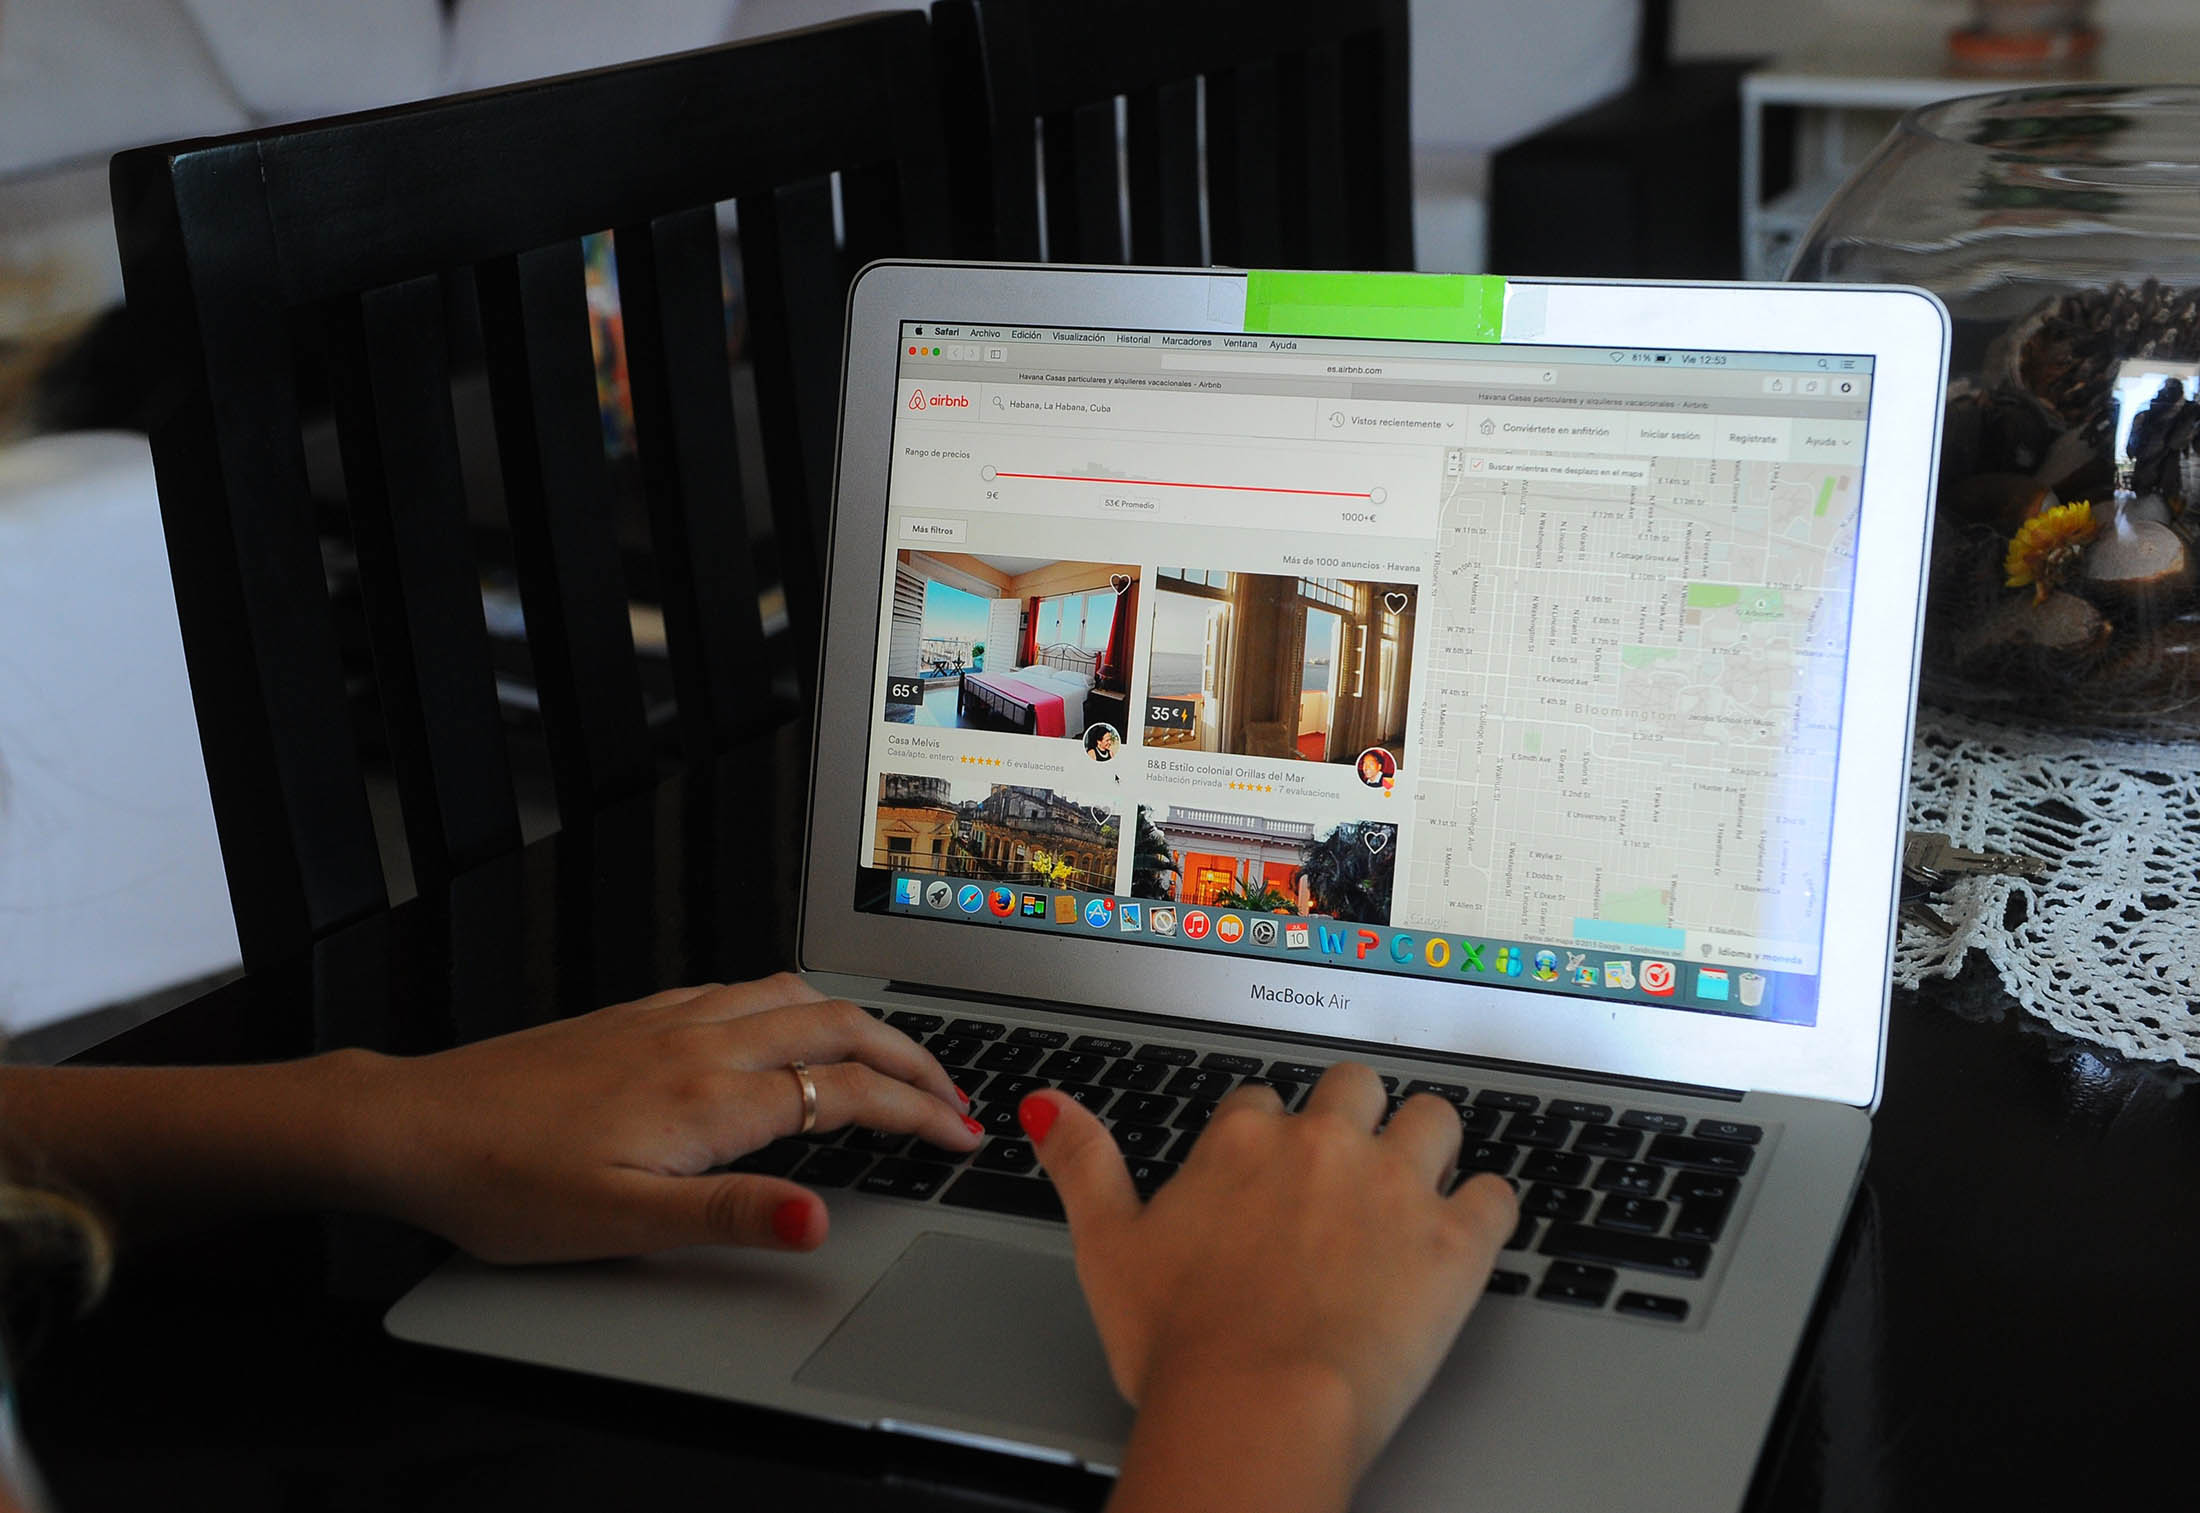 A Cuban woman provides an Airbnb reservation service from a laptop in a rental house in Havana.
